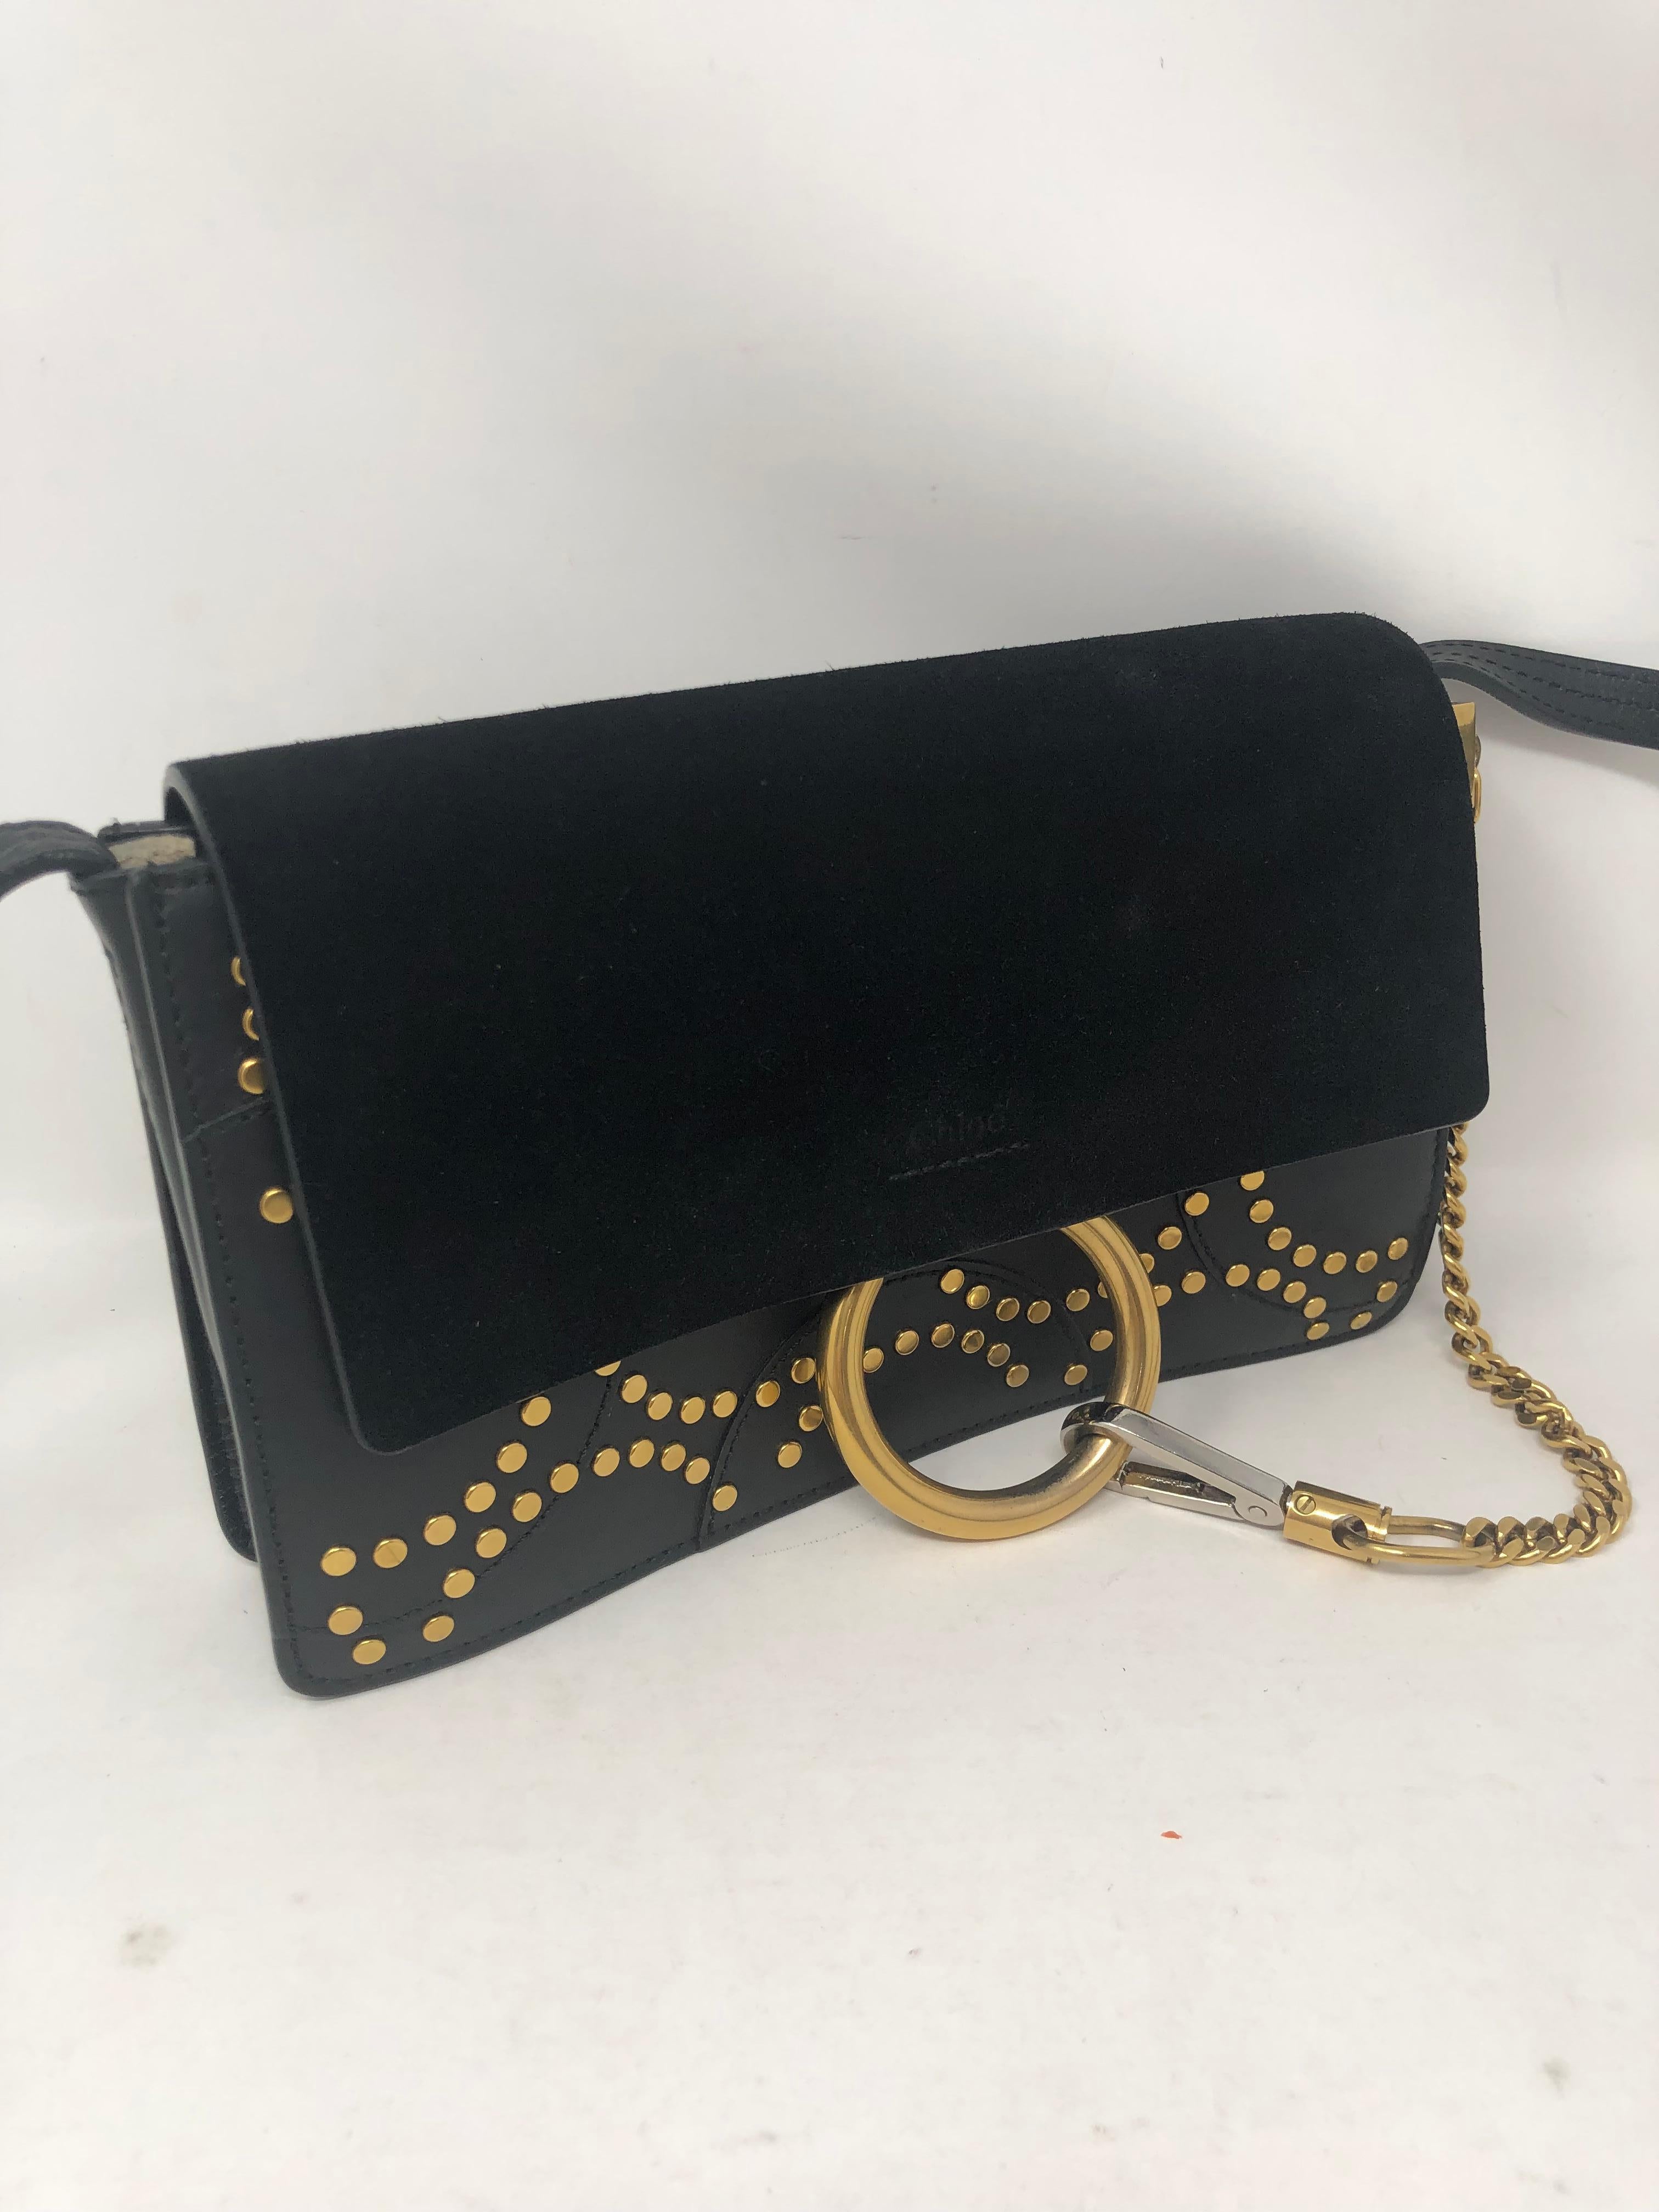 Chloe Black Crossbody with Gold Studs. Detailed leather bag in mint condition. New with tags. Guaranteed authentic. 